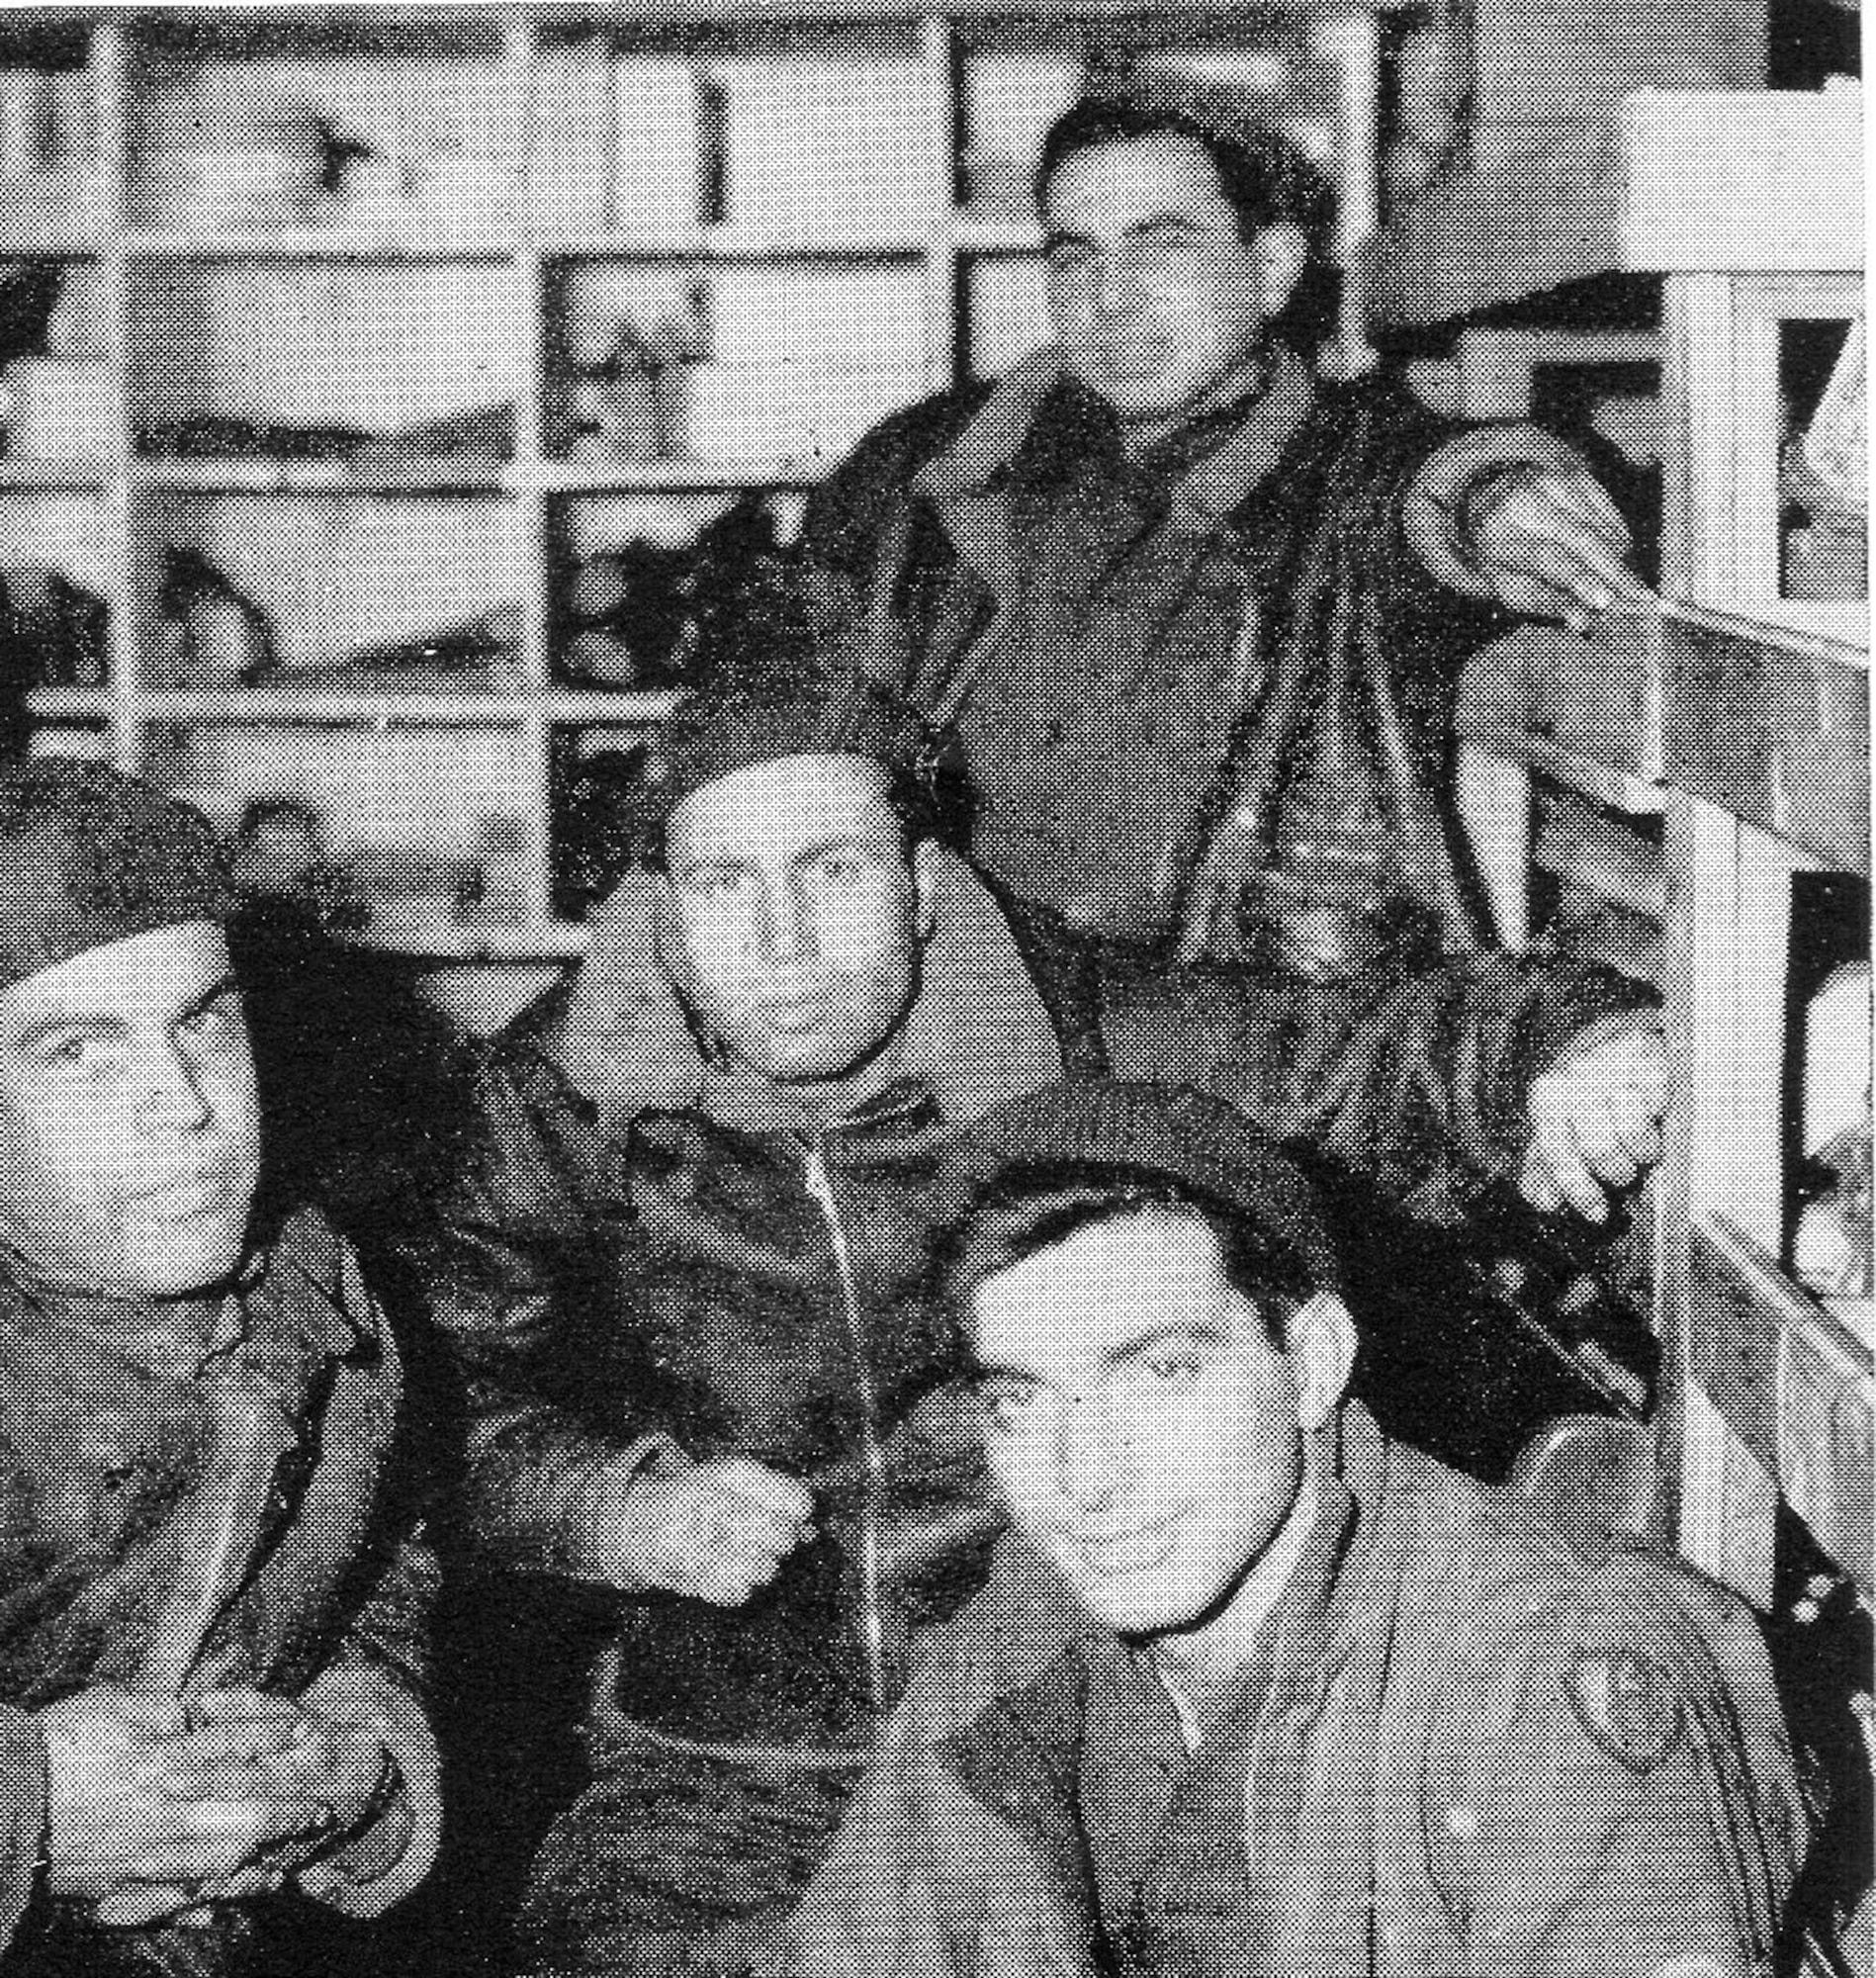 PFC Herbert Feit (standing), 406th Fighter Squadron, showed a relaxed pose in company with other enlisted men in the unit in this undated image.  Note the leather jackets, which undoubtedly came in handy during the cold winter of 1944-45.  He went missing on 1 April 1945.